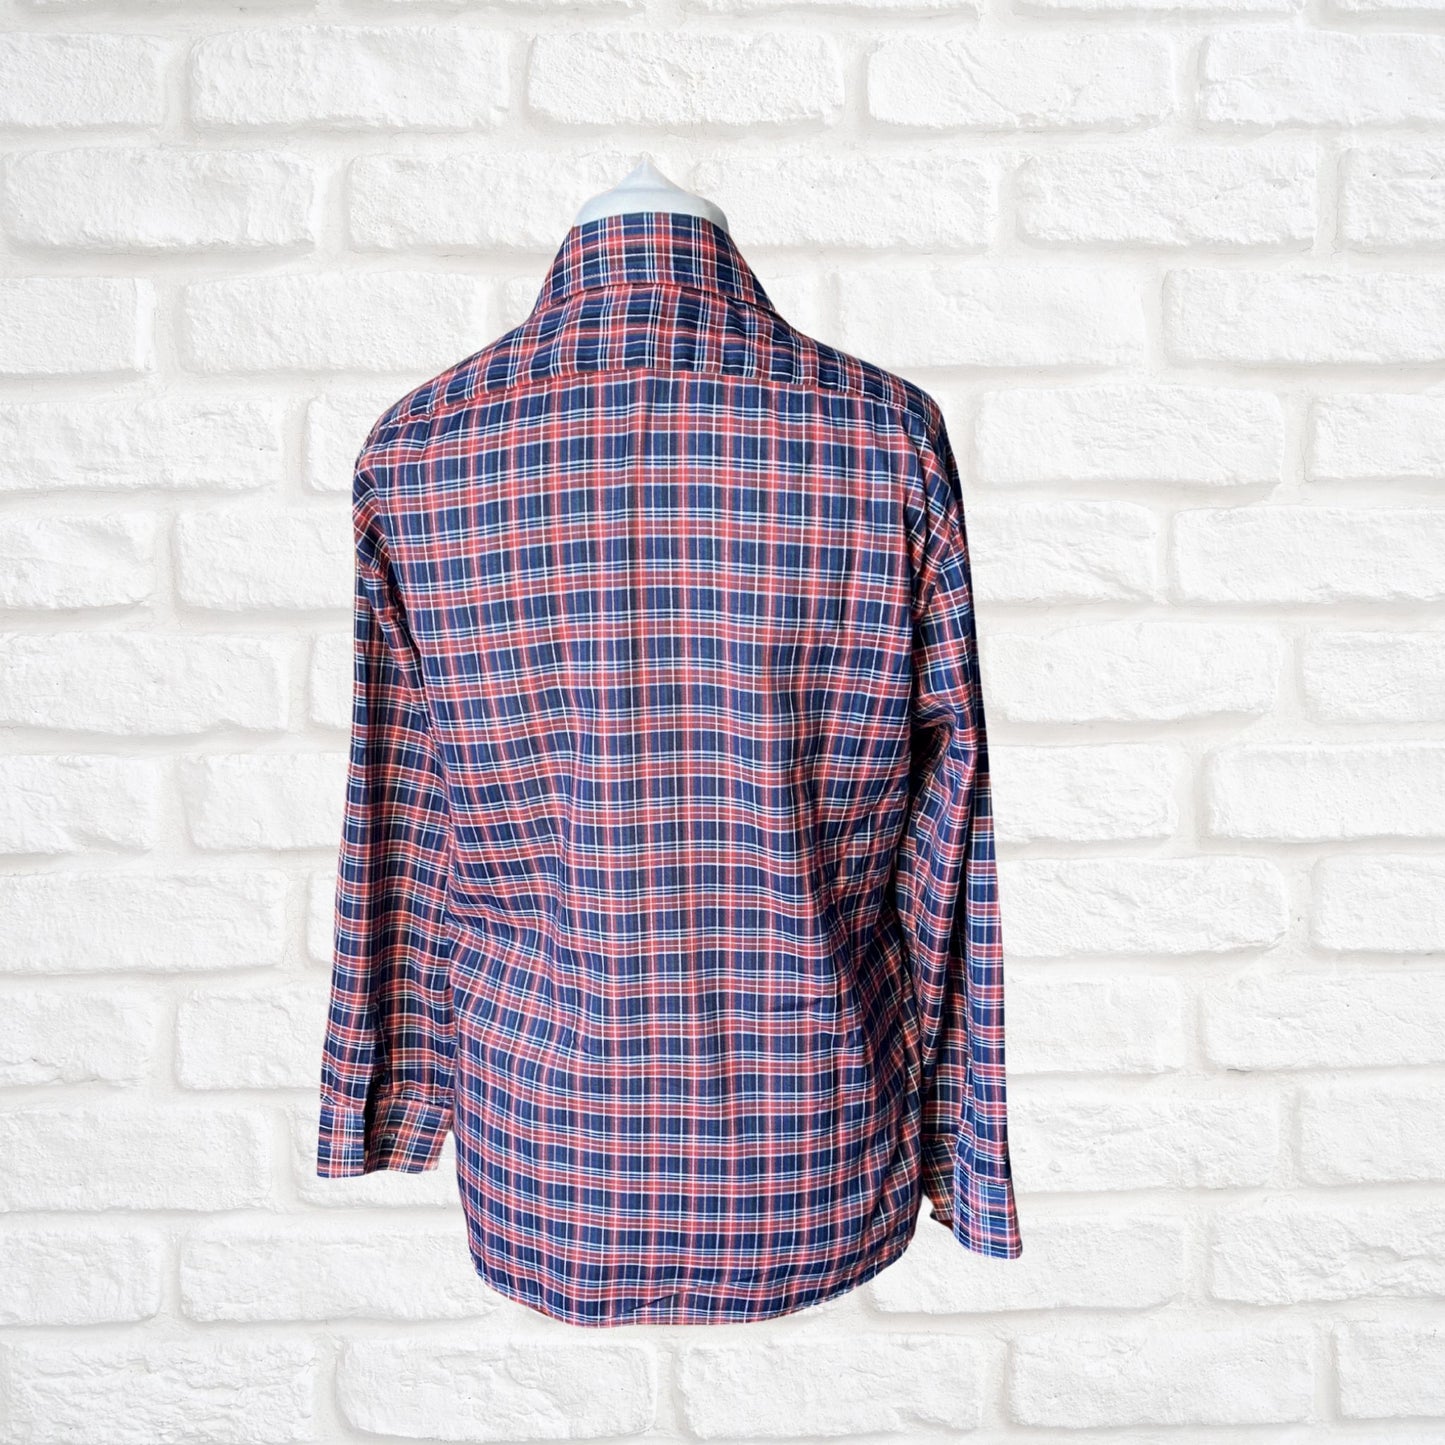 70s Vintage Red and Blue Checked Lightweight Shirt with Dagger Collar - Classic Retro Style for Casual Weekend Wear. Approx UK size M to L (men) 16-18 (women)